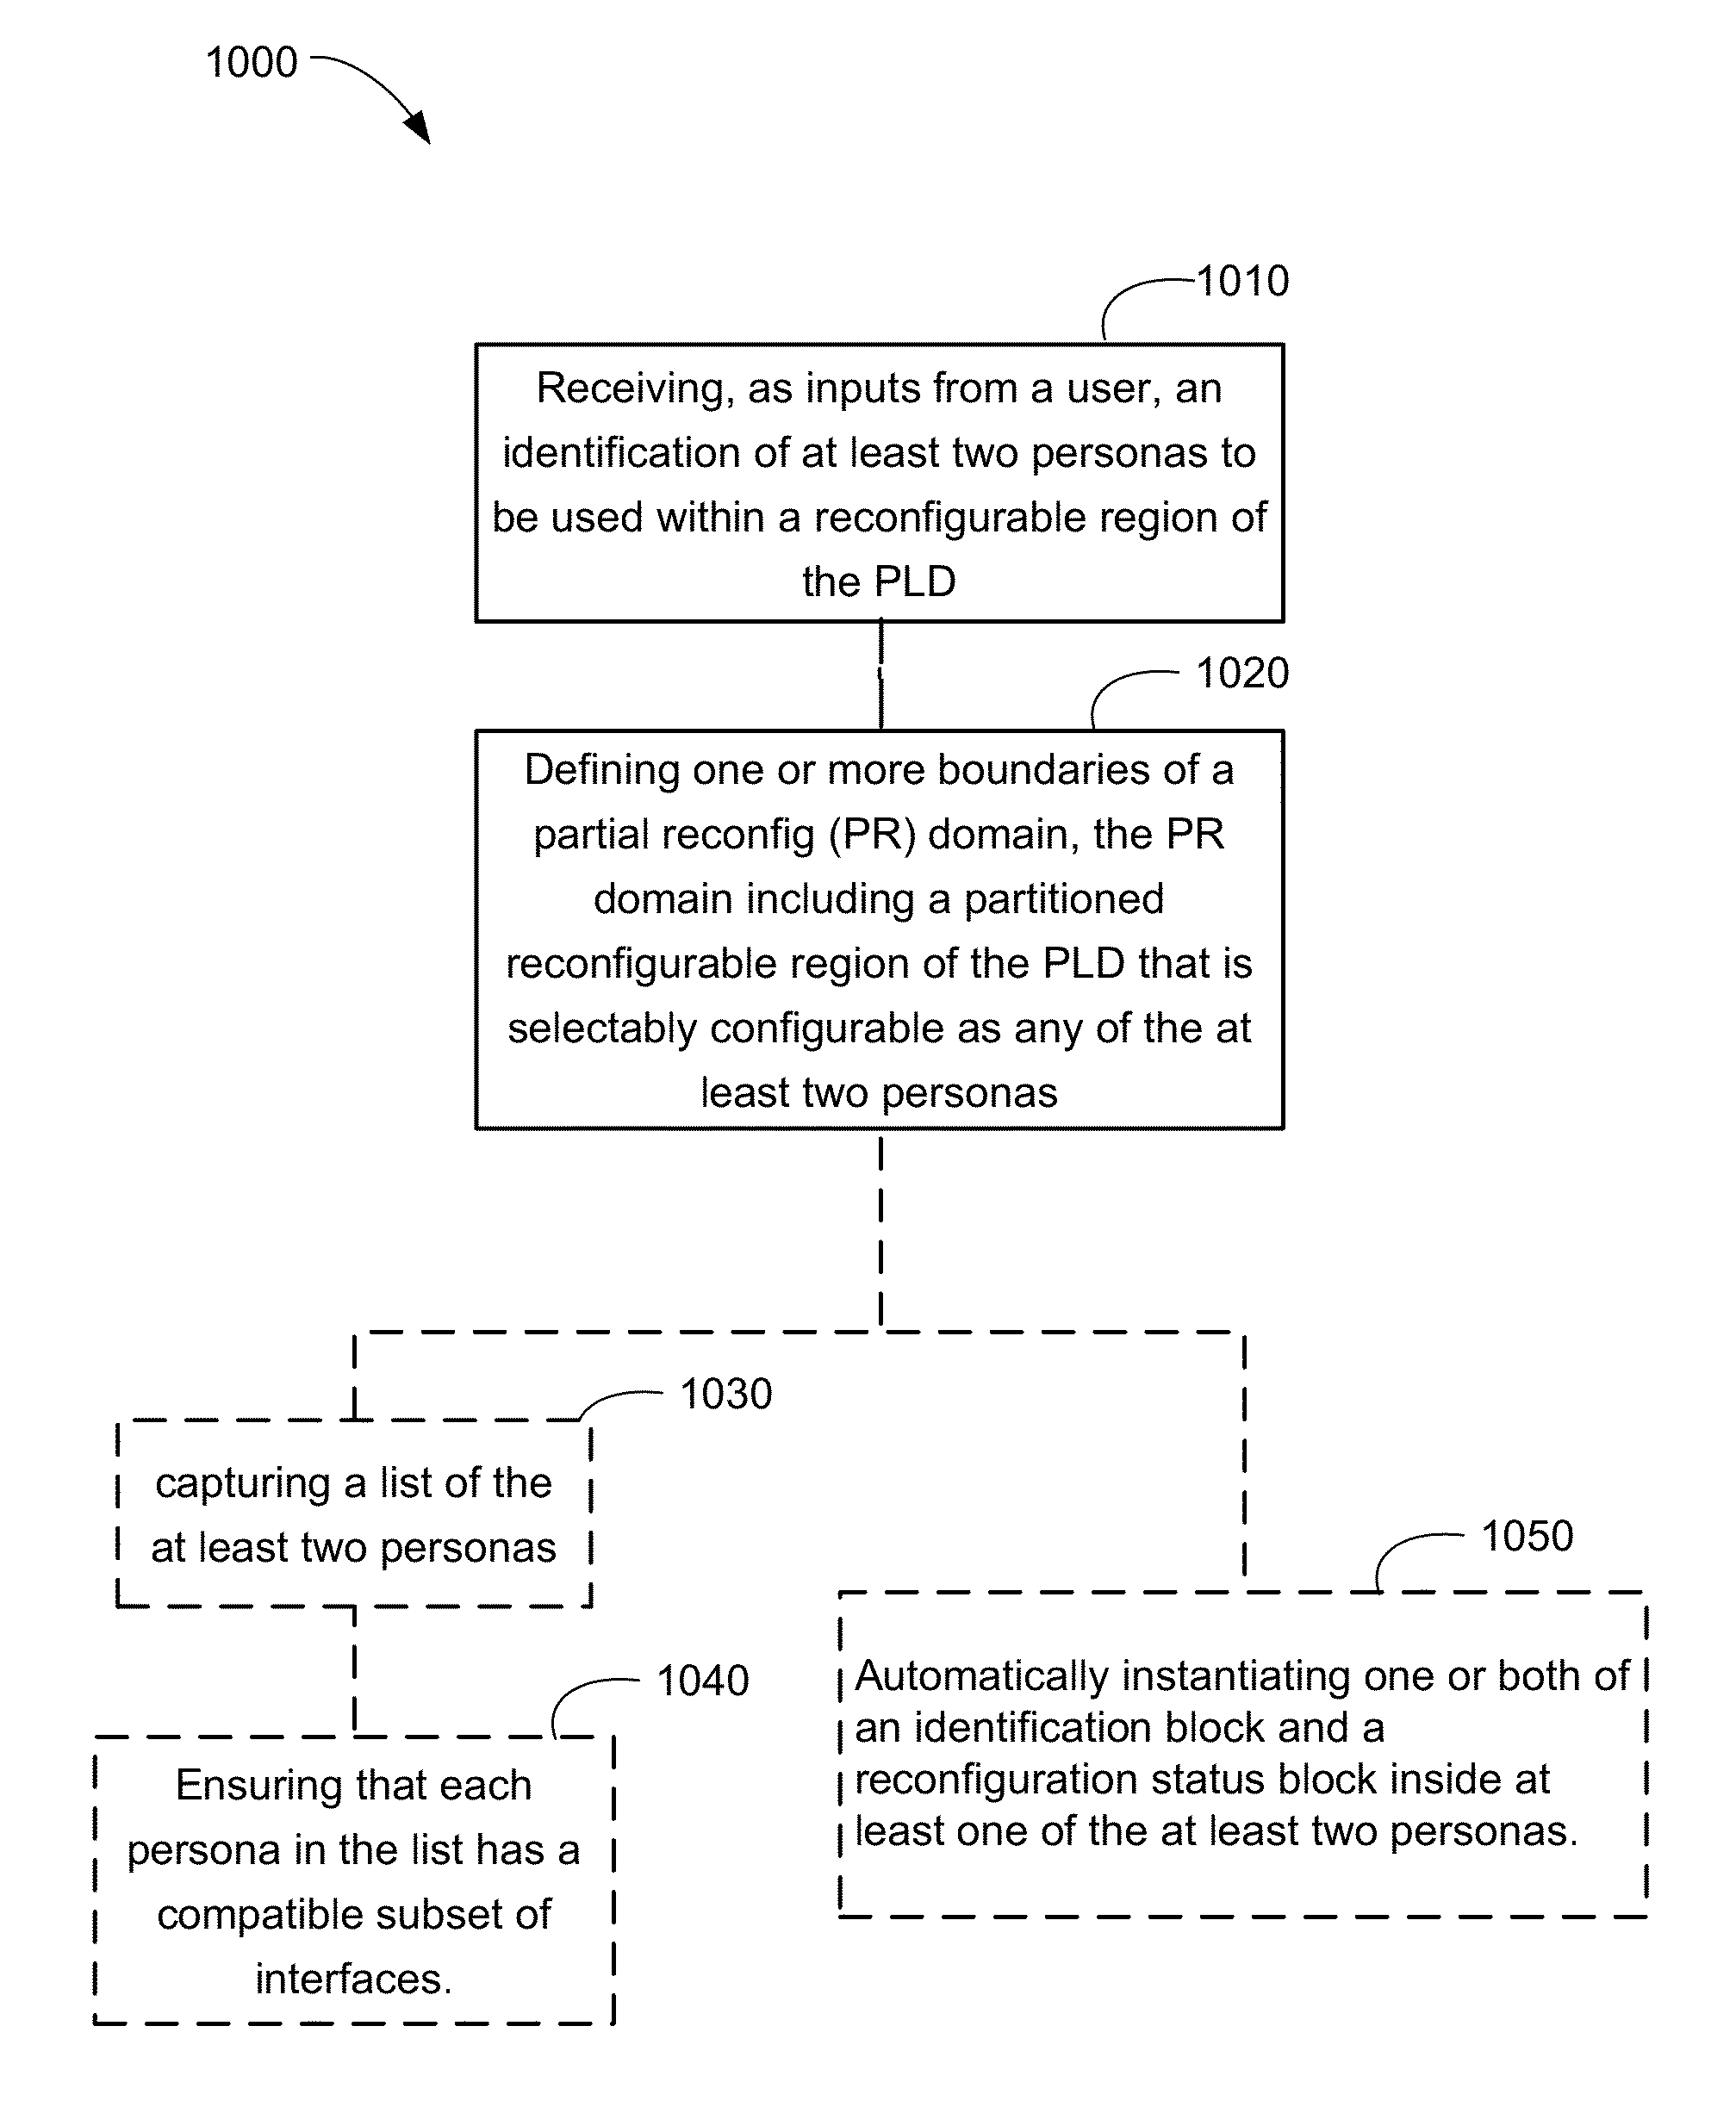 System level tools to support FPGA partial reconfiguration